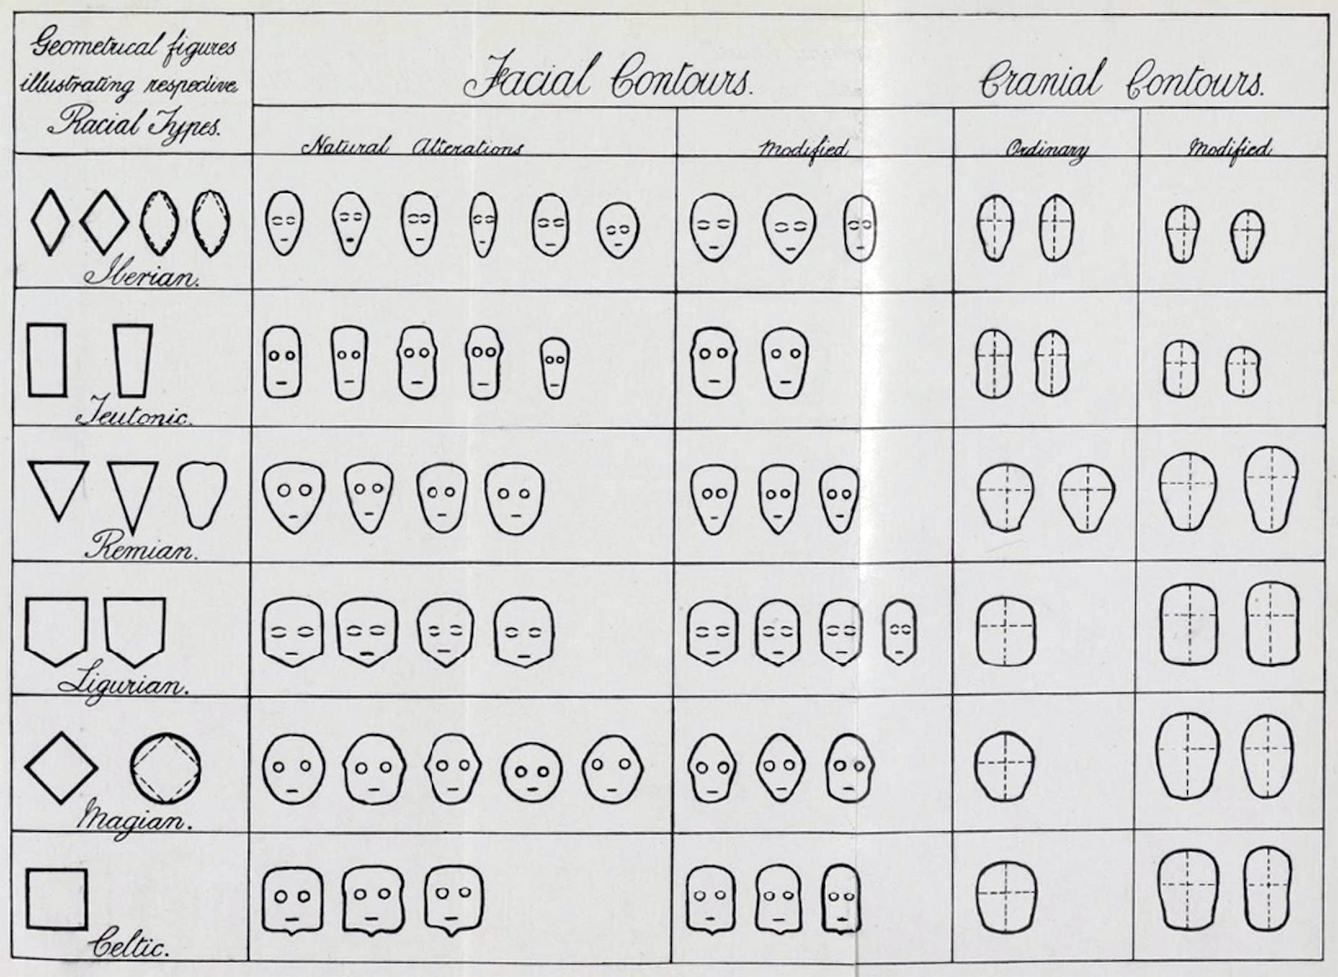 A black and white, hand drawn chart showing different head shapes.